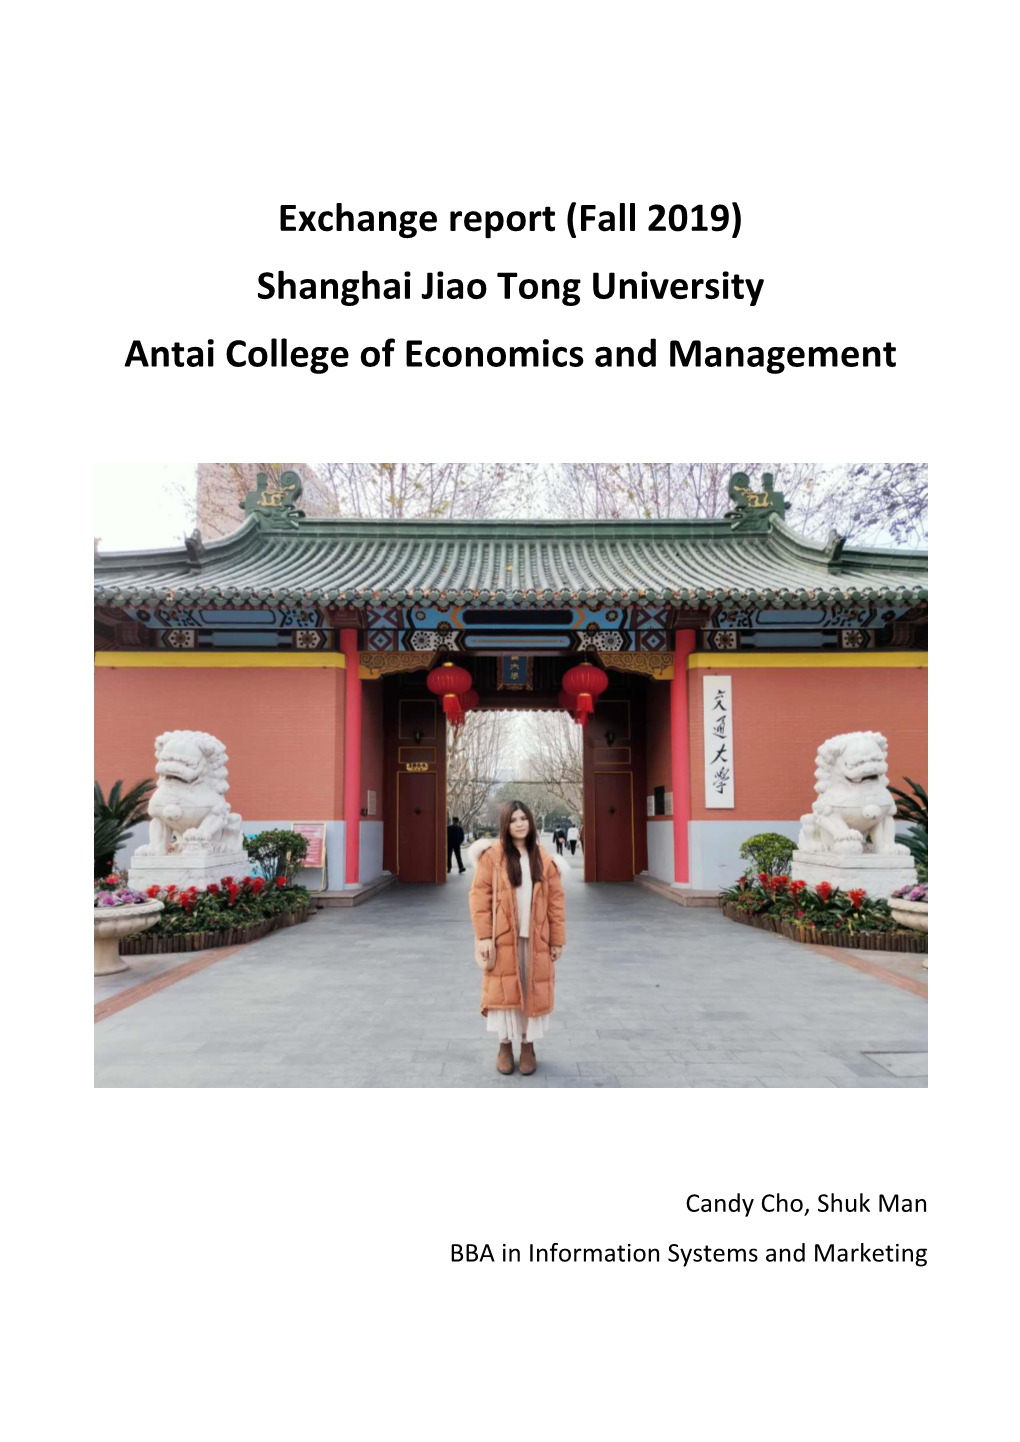 Exchange Report (Fall 2019) Shanghai Jiao Tong University Antai College of Economics and Management